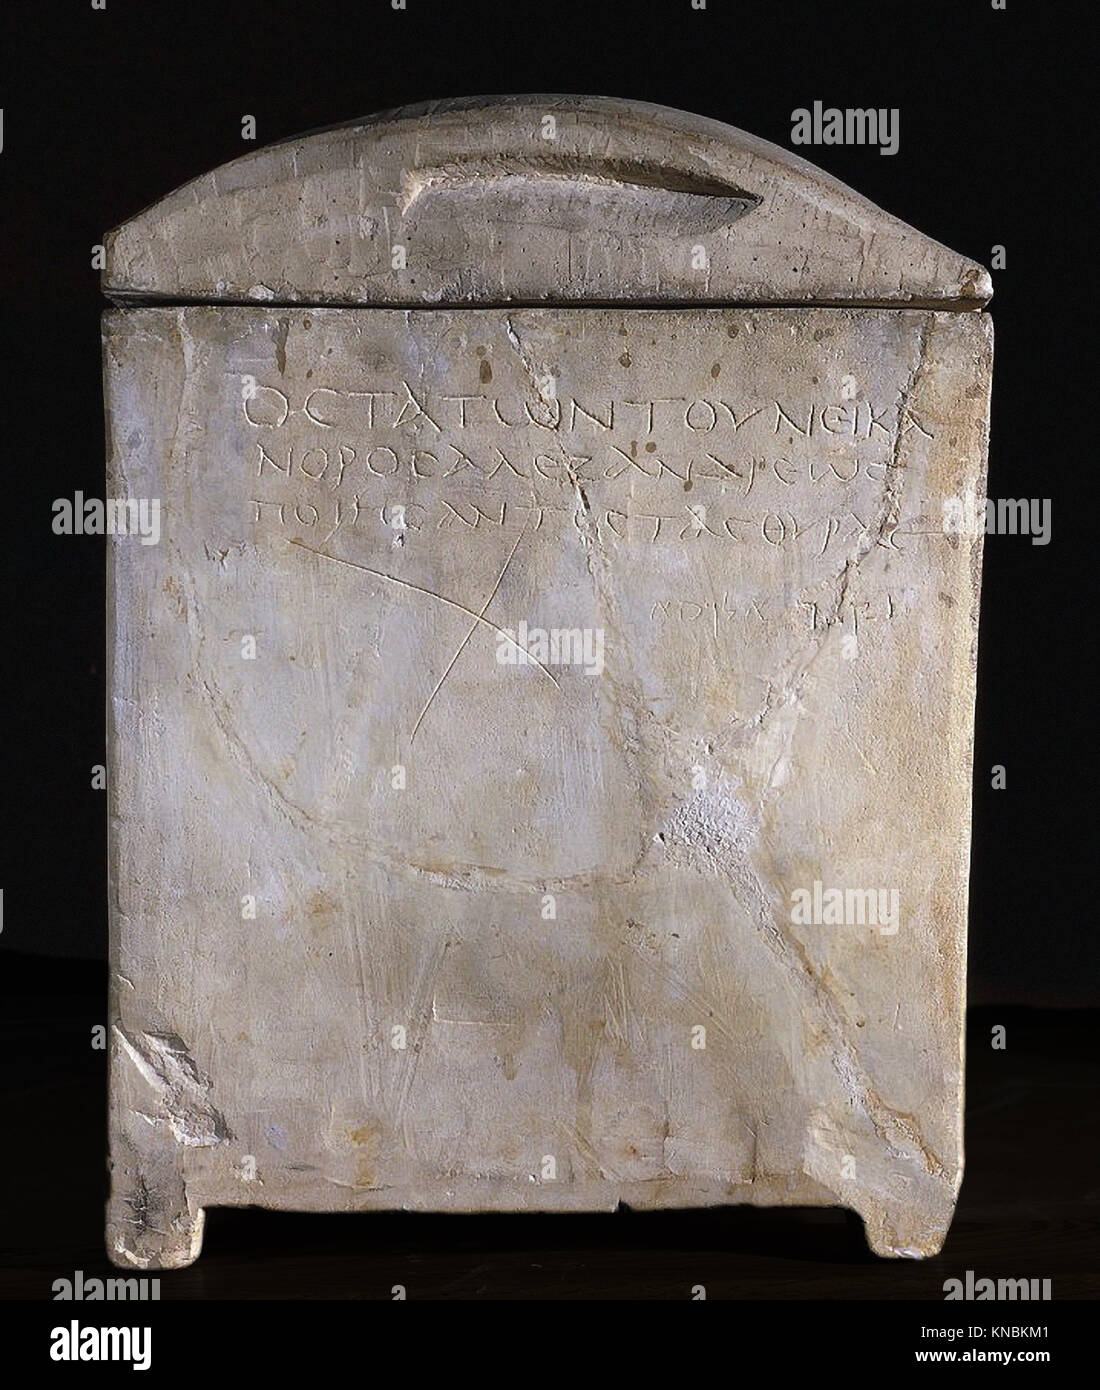 6201. Ossuary from the Nicanor cave from Mt. Scopus, Jerusalem bearing a Greek inscription reading: ‘Bones of the family of Nicanor the Alexandrian wh Stock Photo